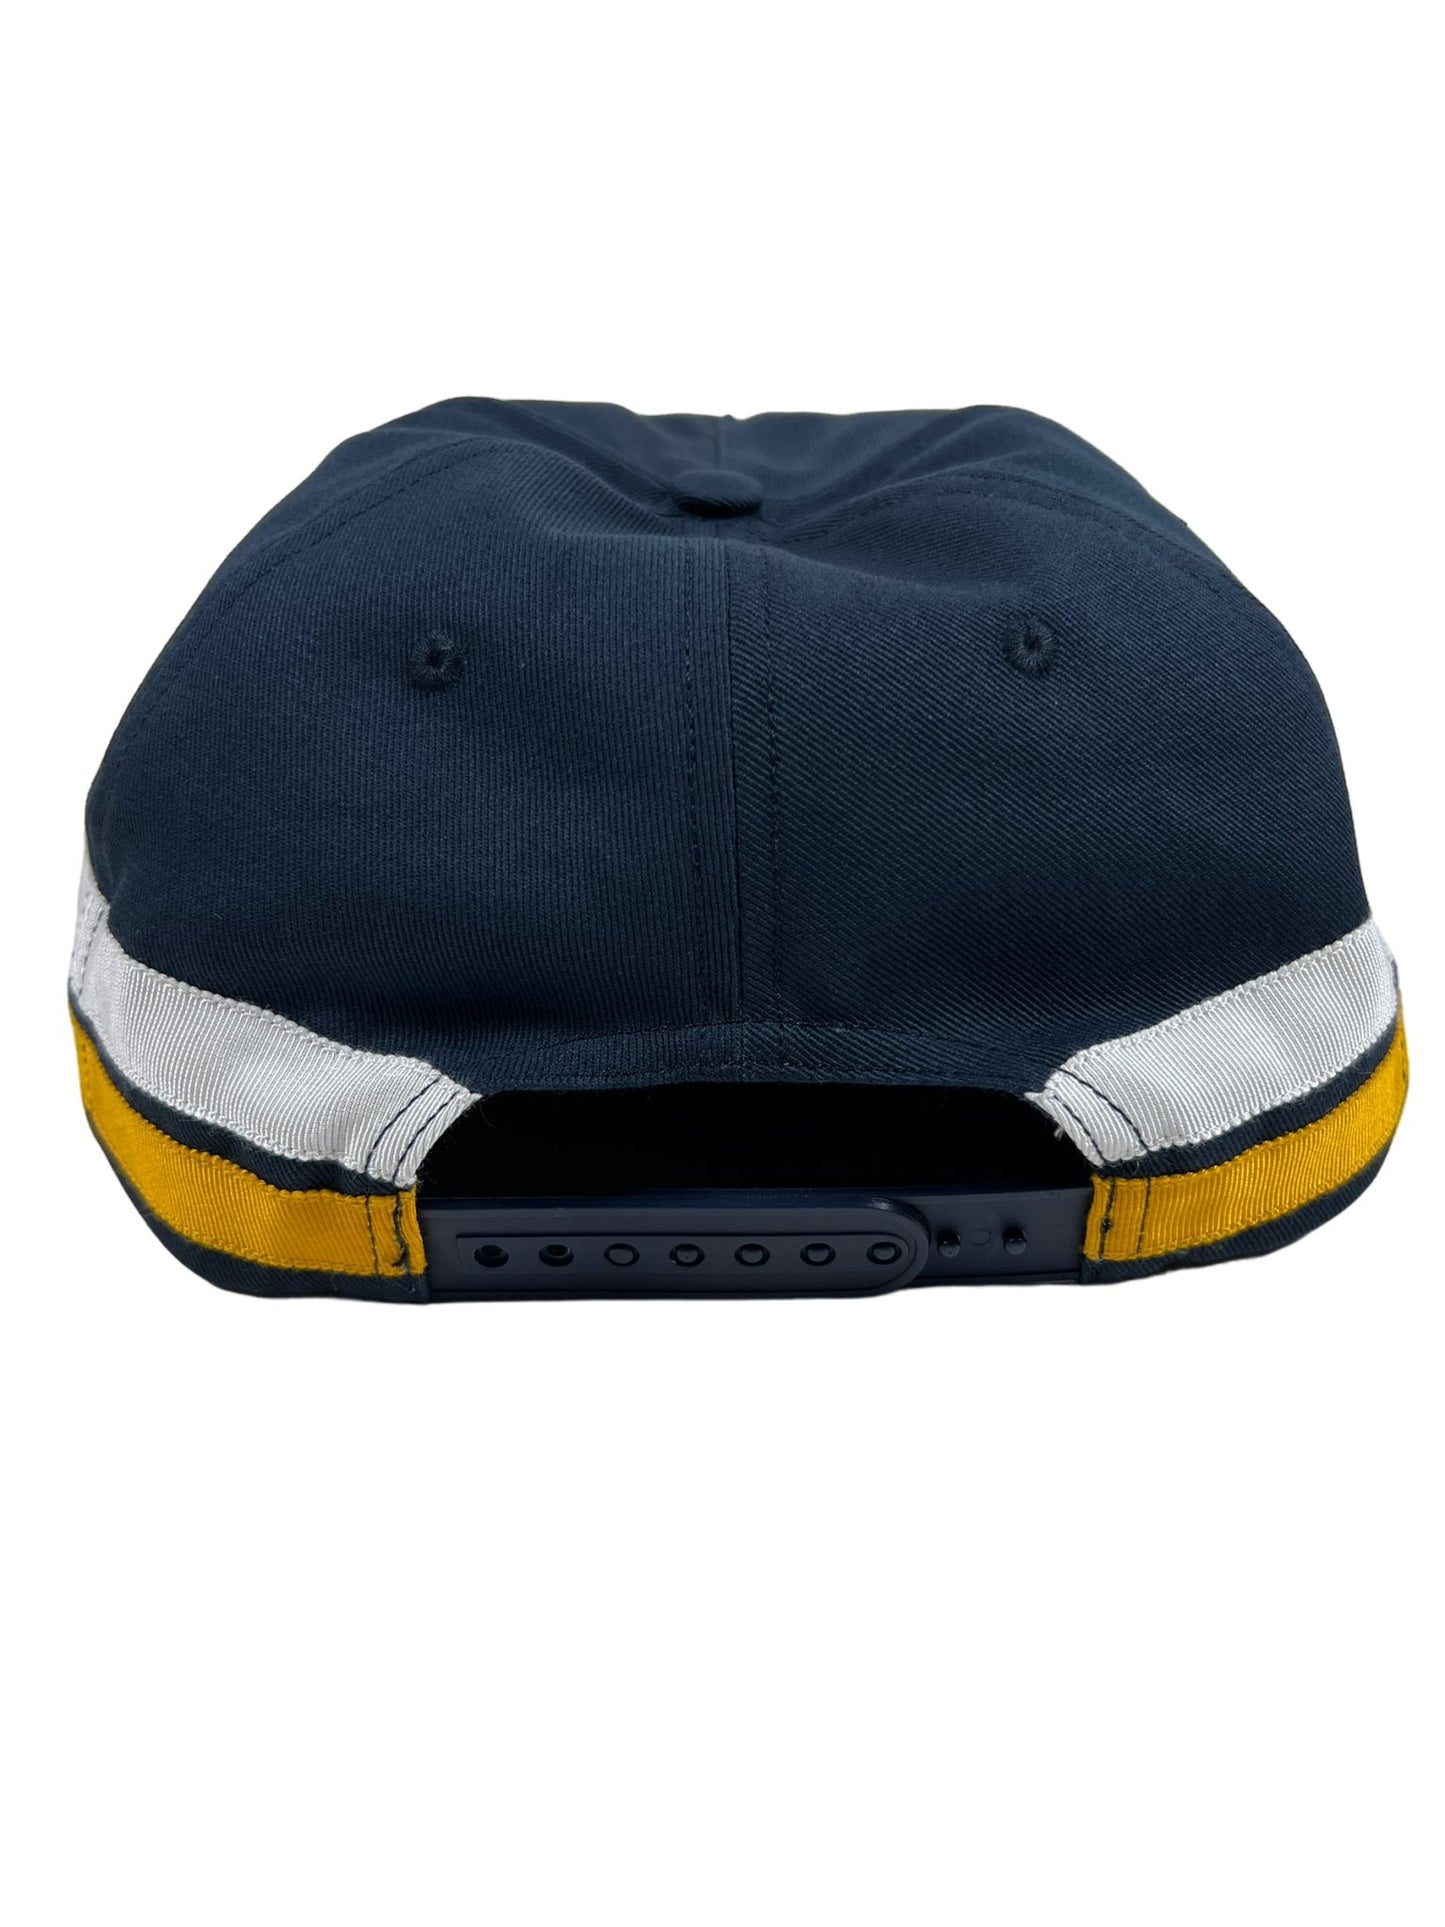 The high-quality materials, RHUDE LIGHTING PANEL HAT in navy and yellow.